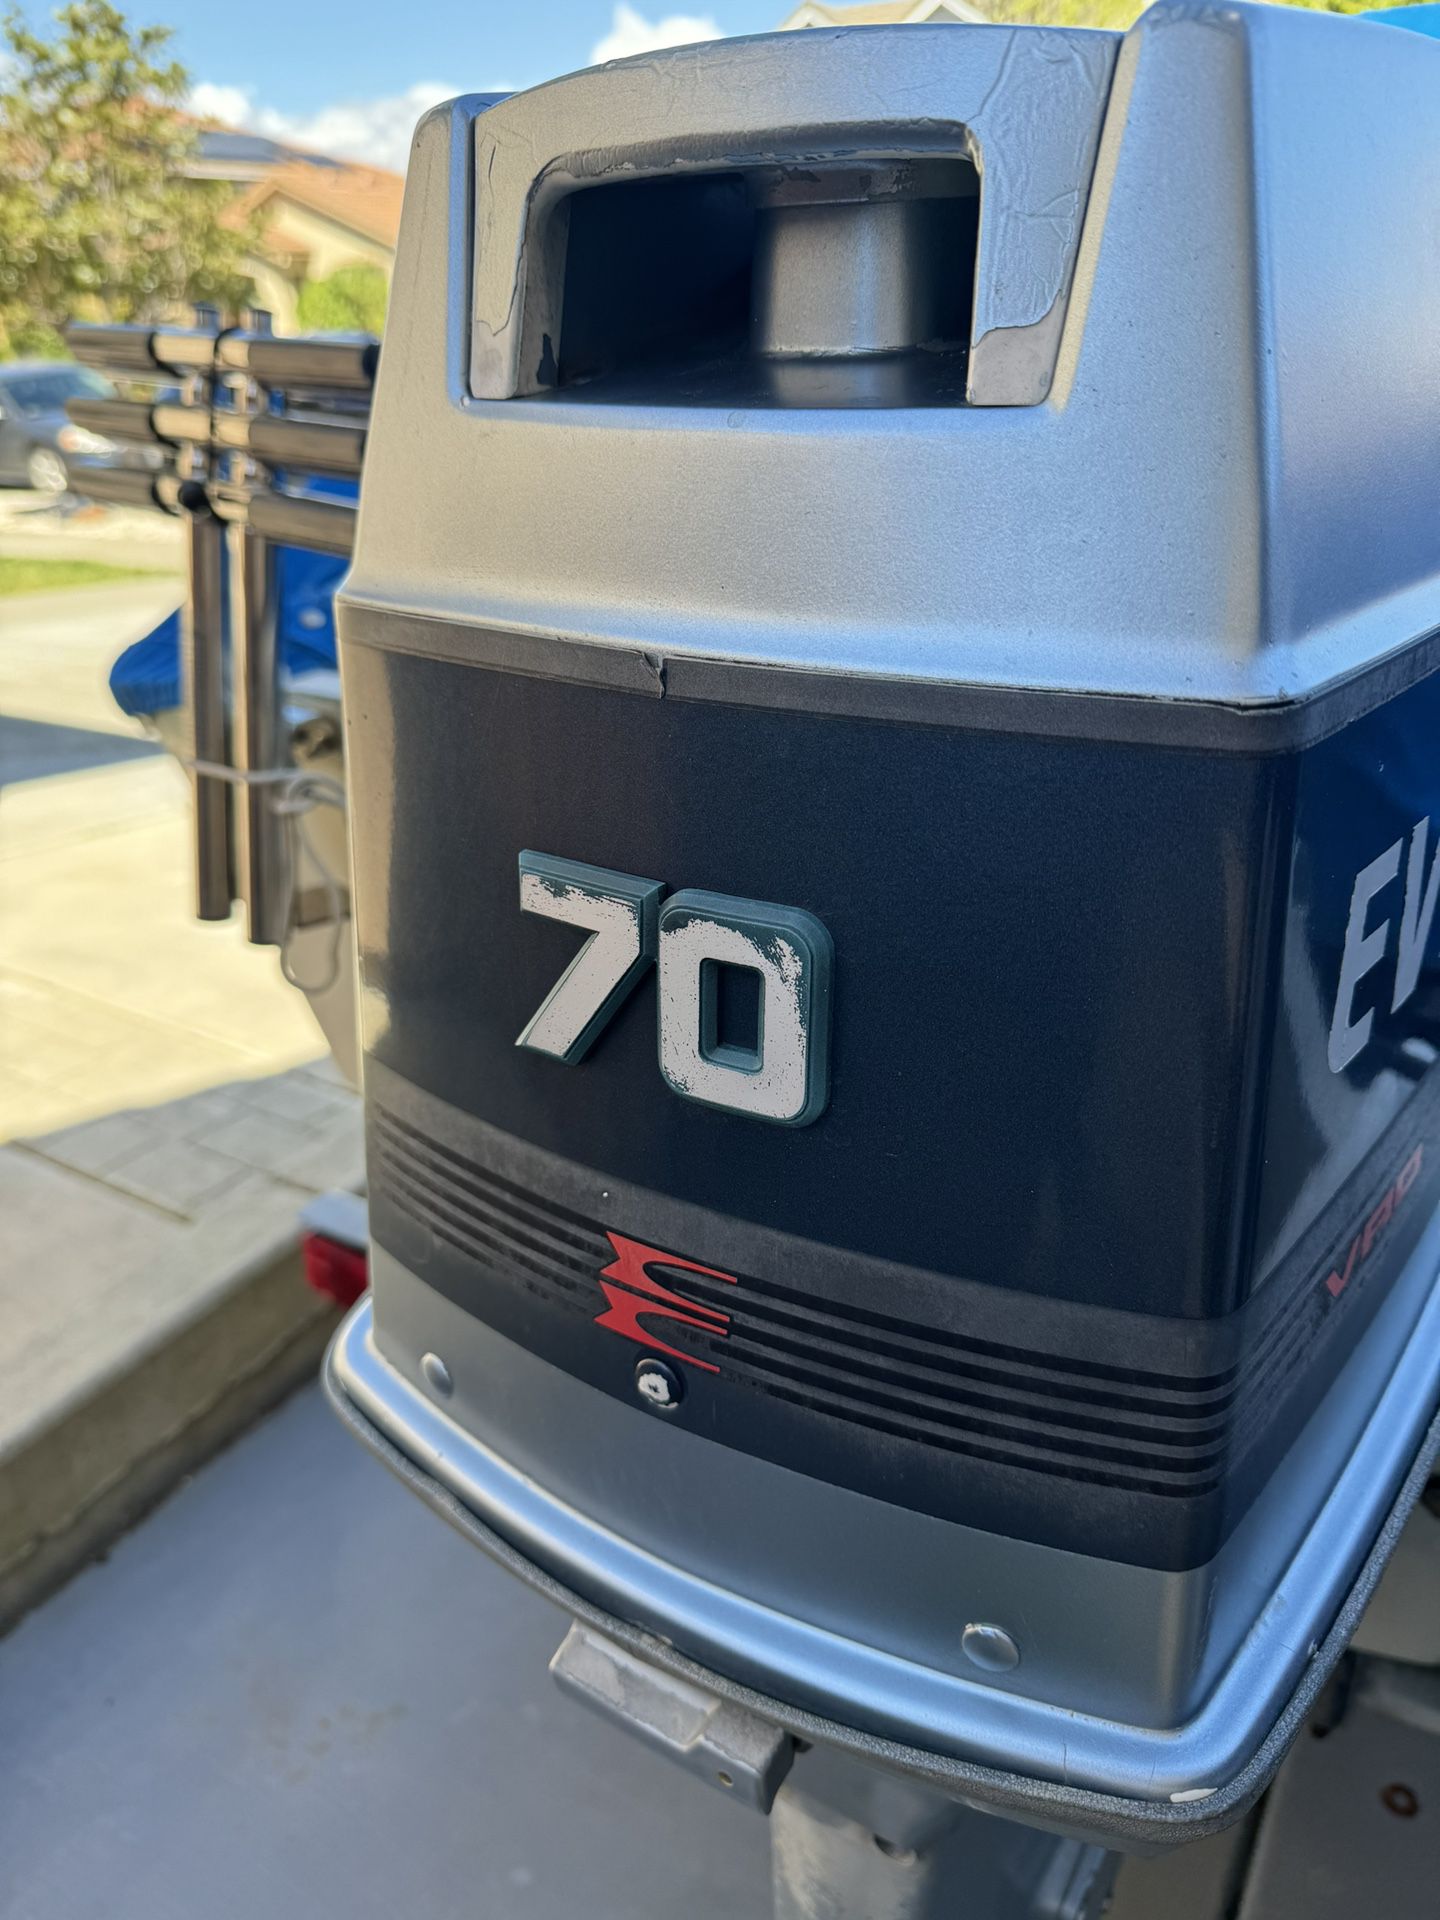  70 Hp Outboard Motor